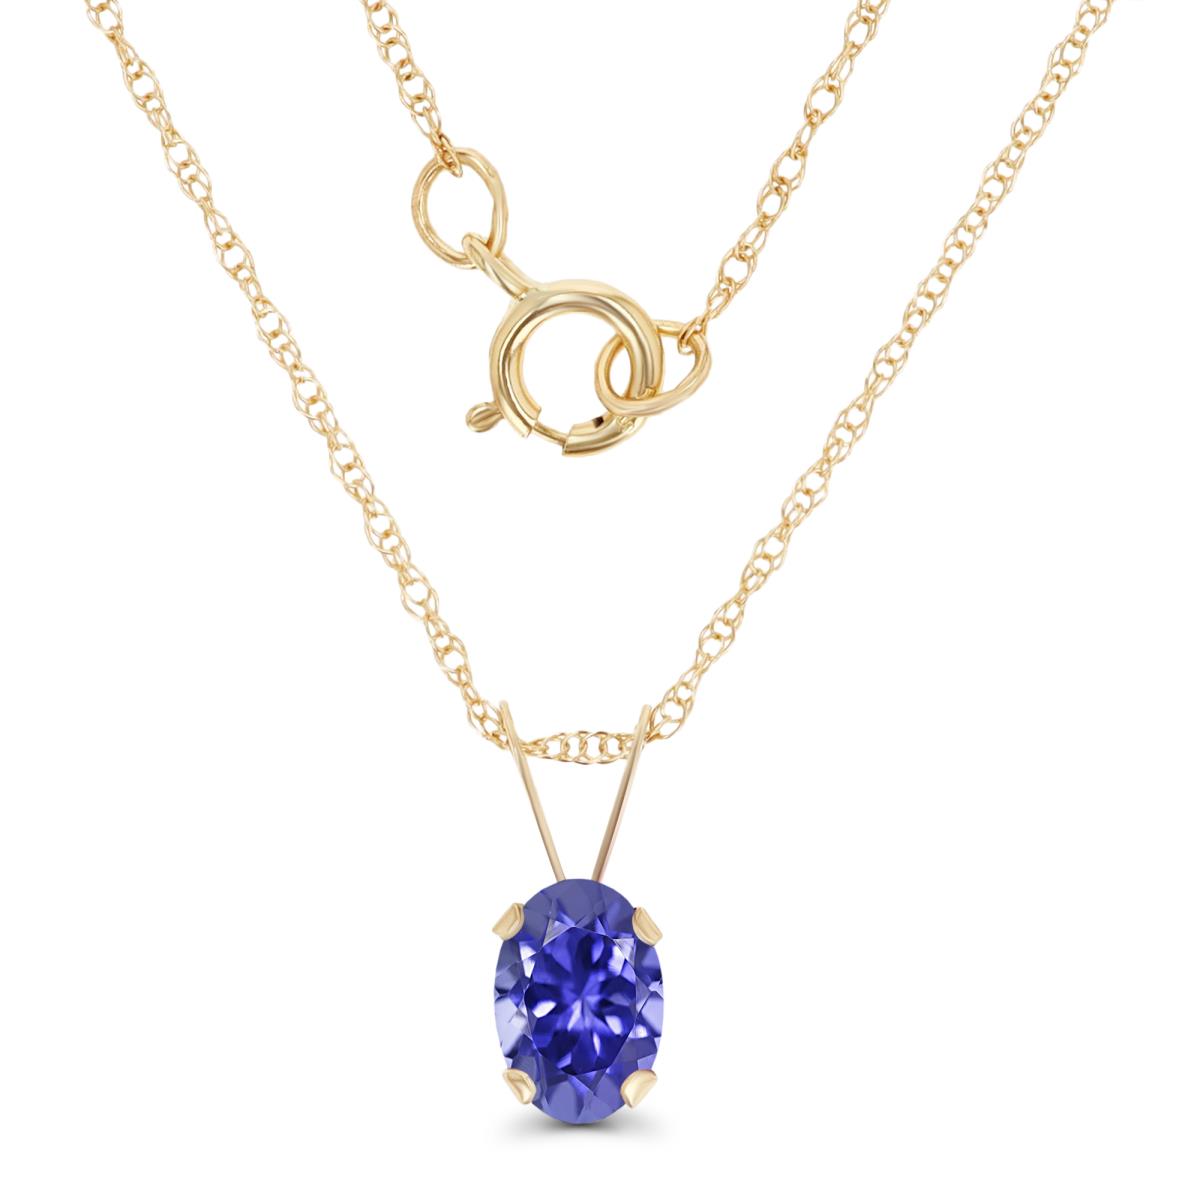 10K Yellow Gold 6x4mm Oval Tanzanite 18" Rope Chain Necklace